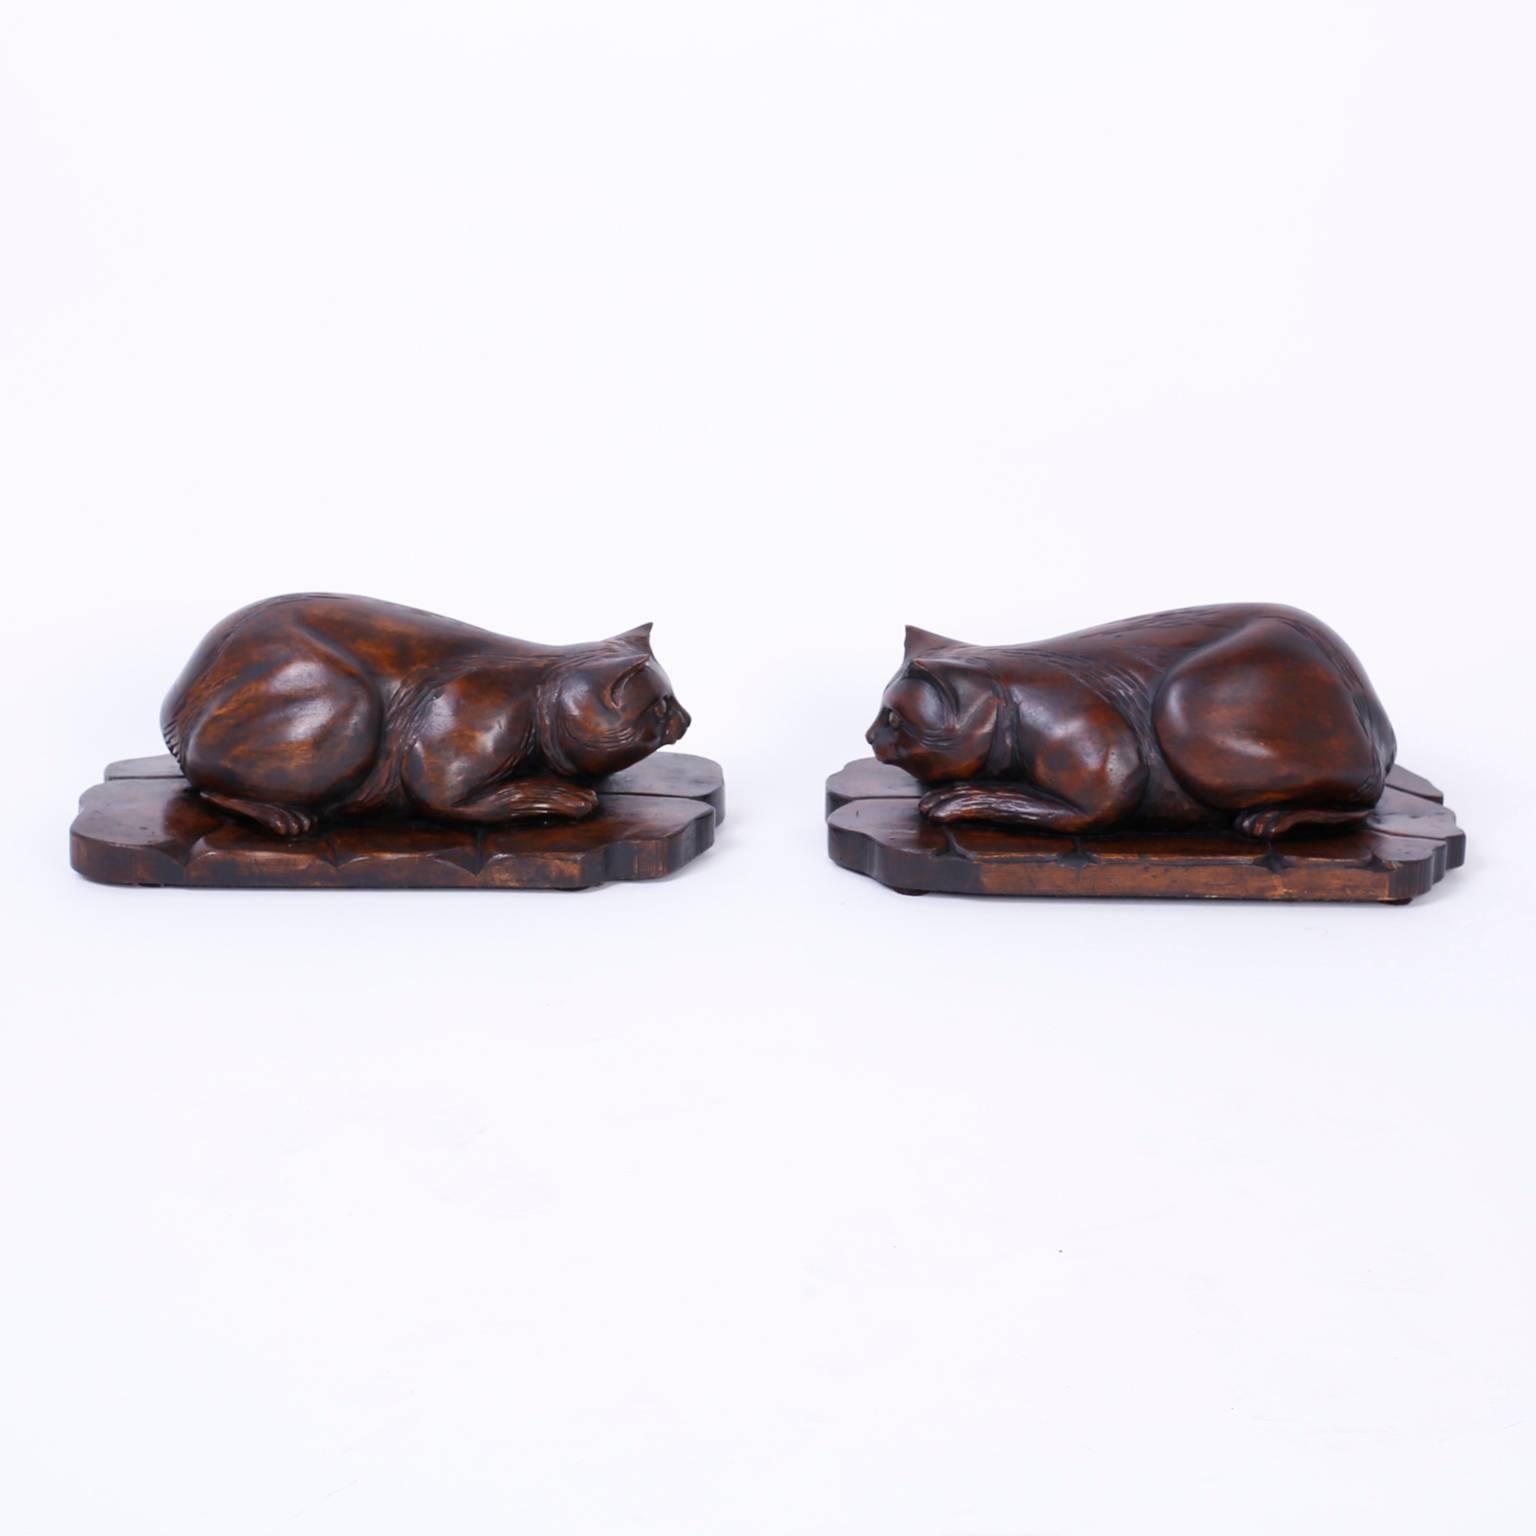 Antique English country cats poised in the familiar pounce posture on a faux stone base. Expertly carved out of pine and presented with a folky rustic finish.